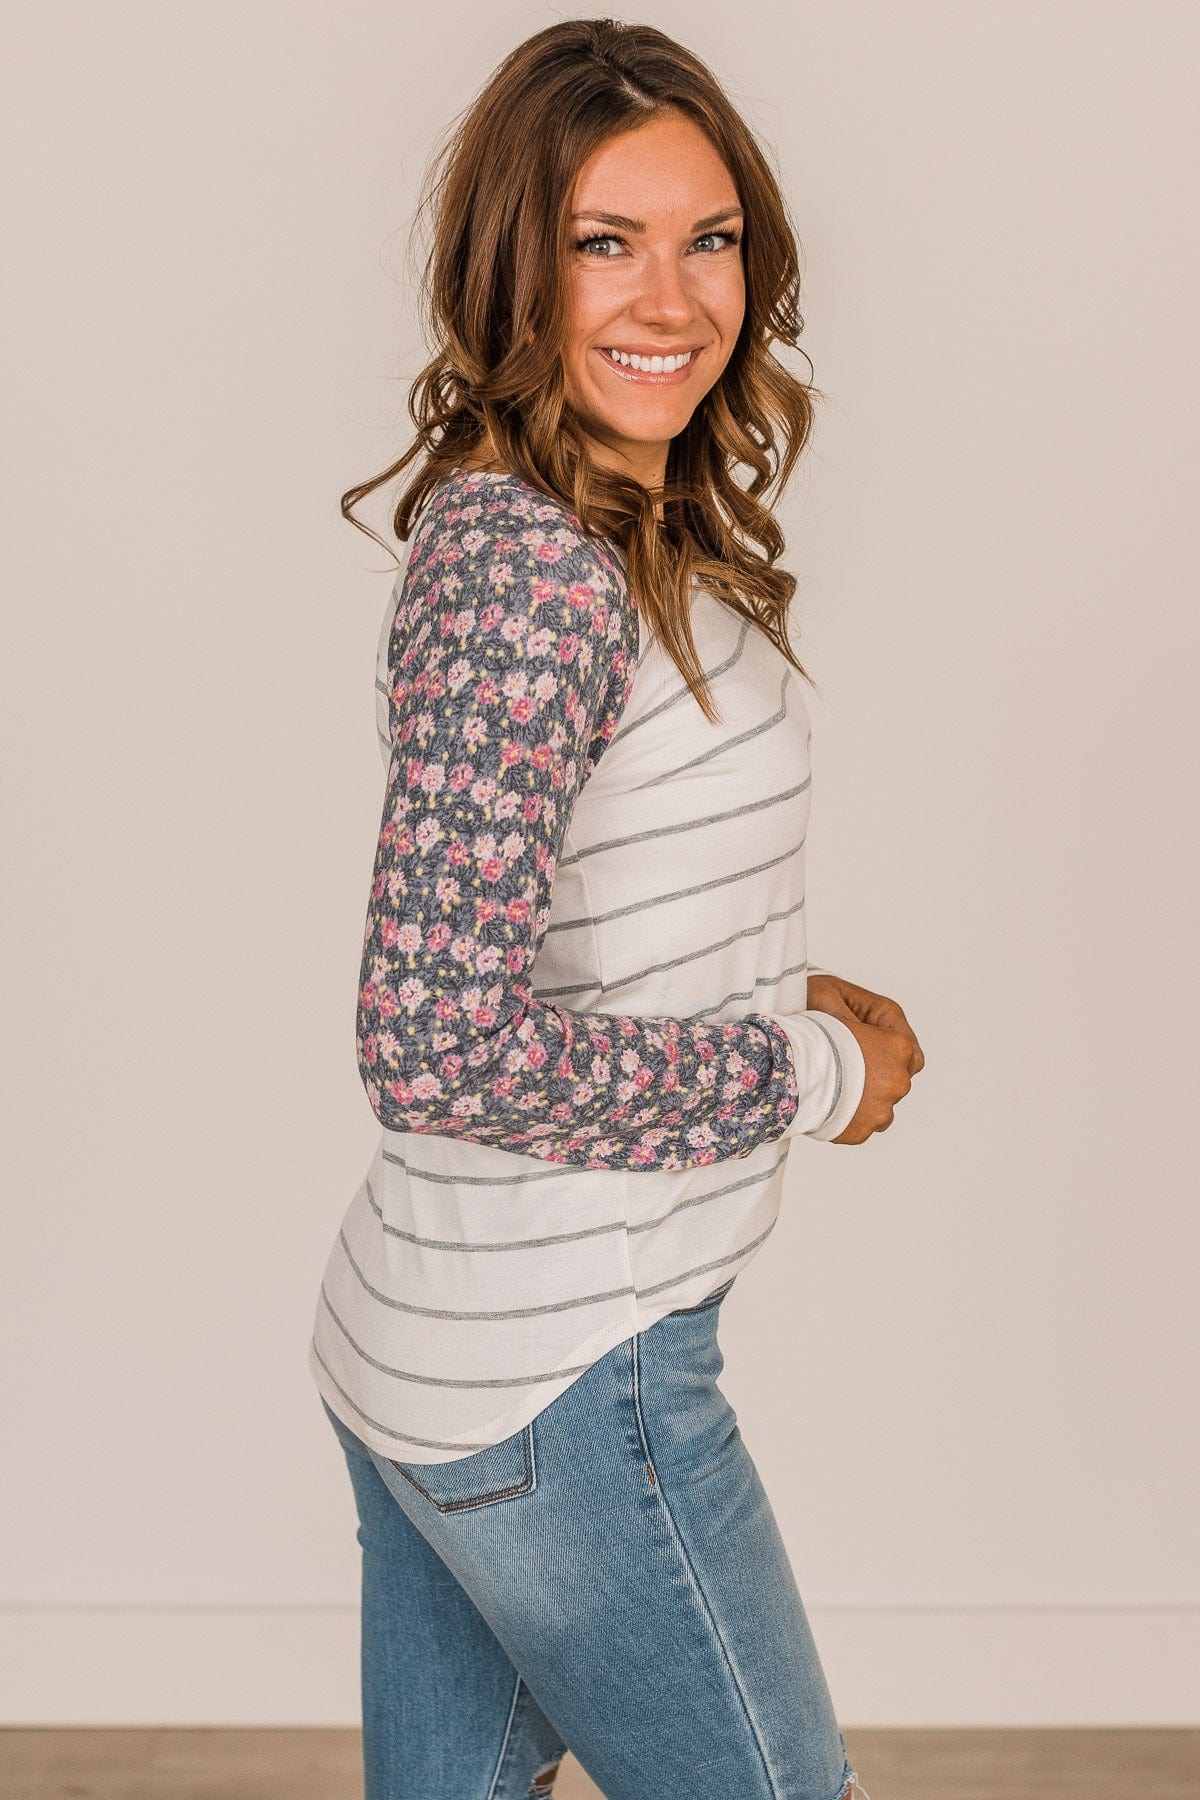 Floral Desires Long Sleeve Knit Top- Ivory & Charcoal